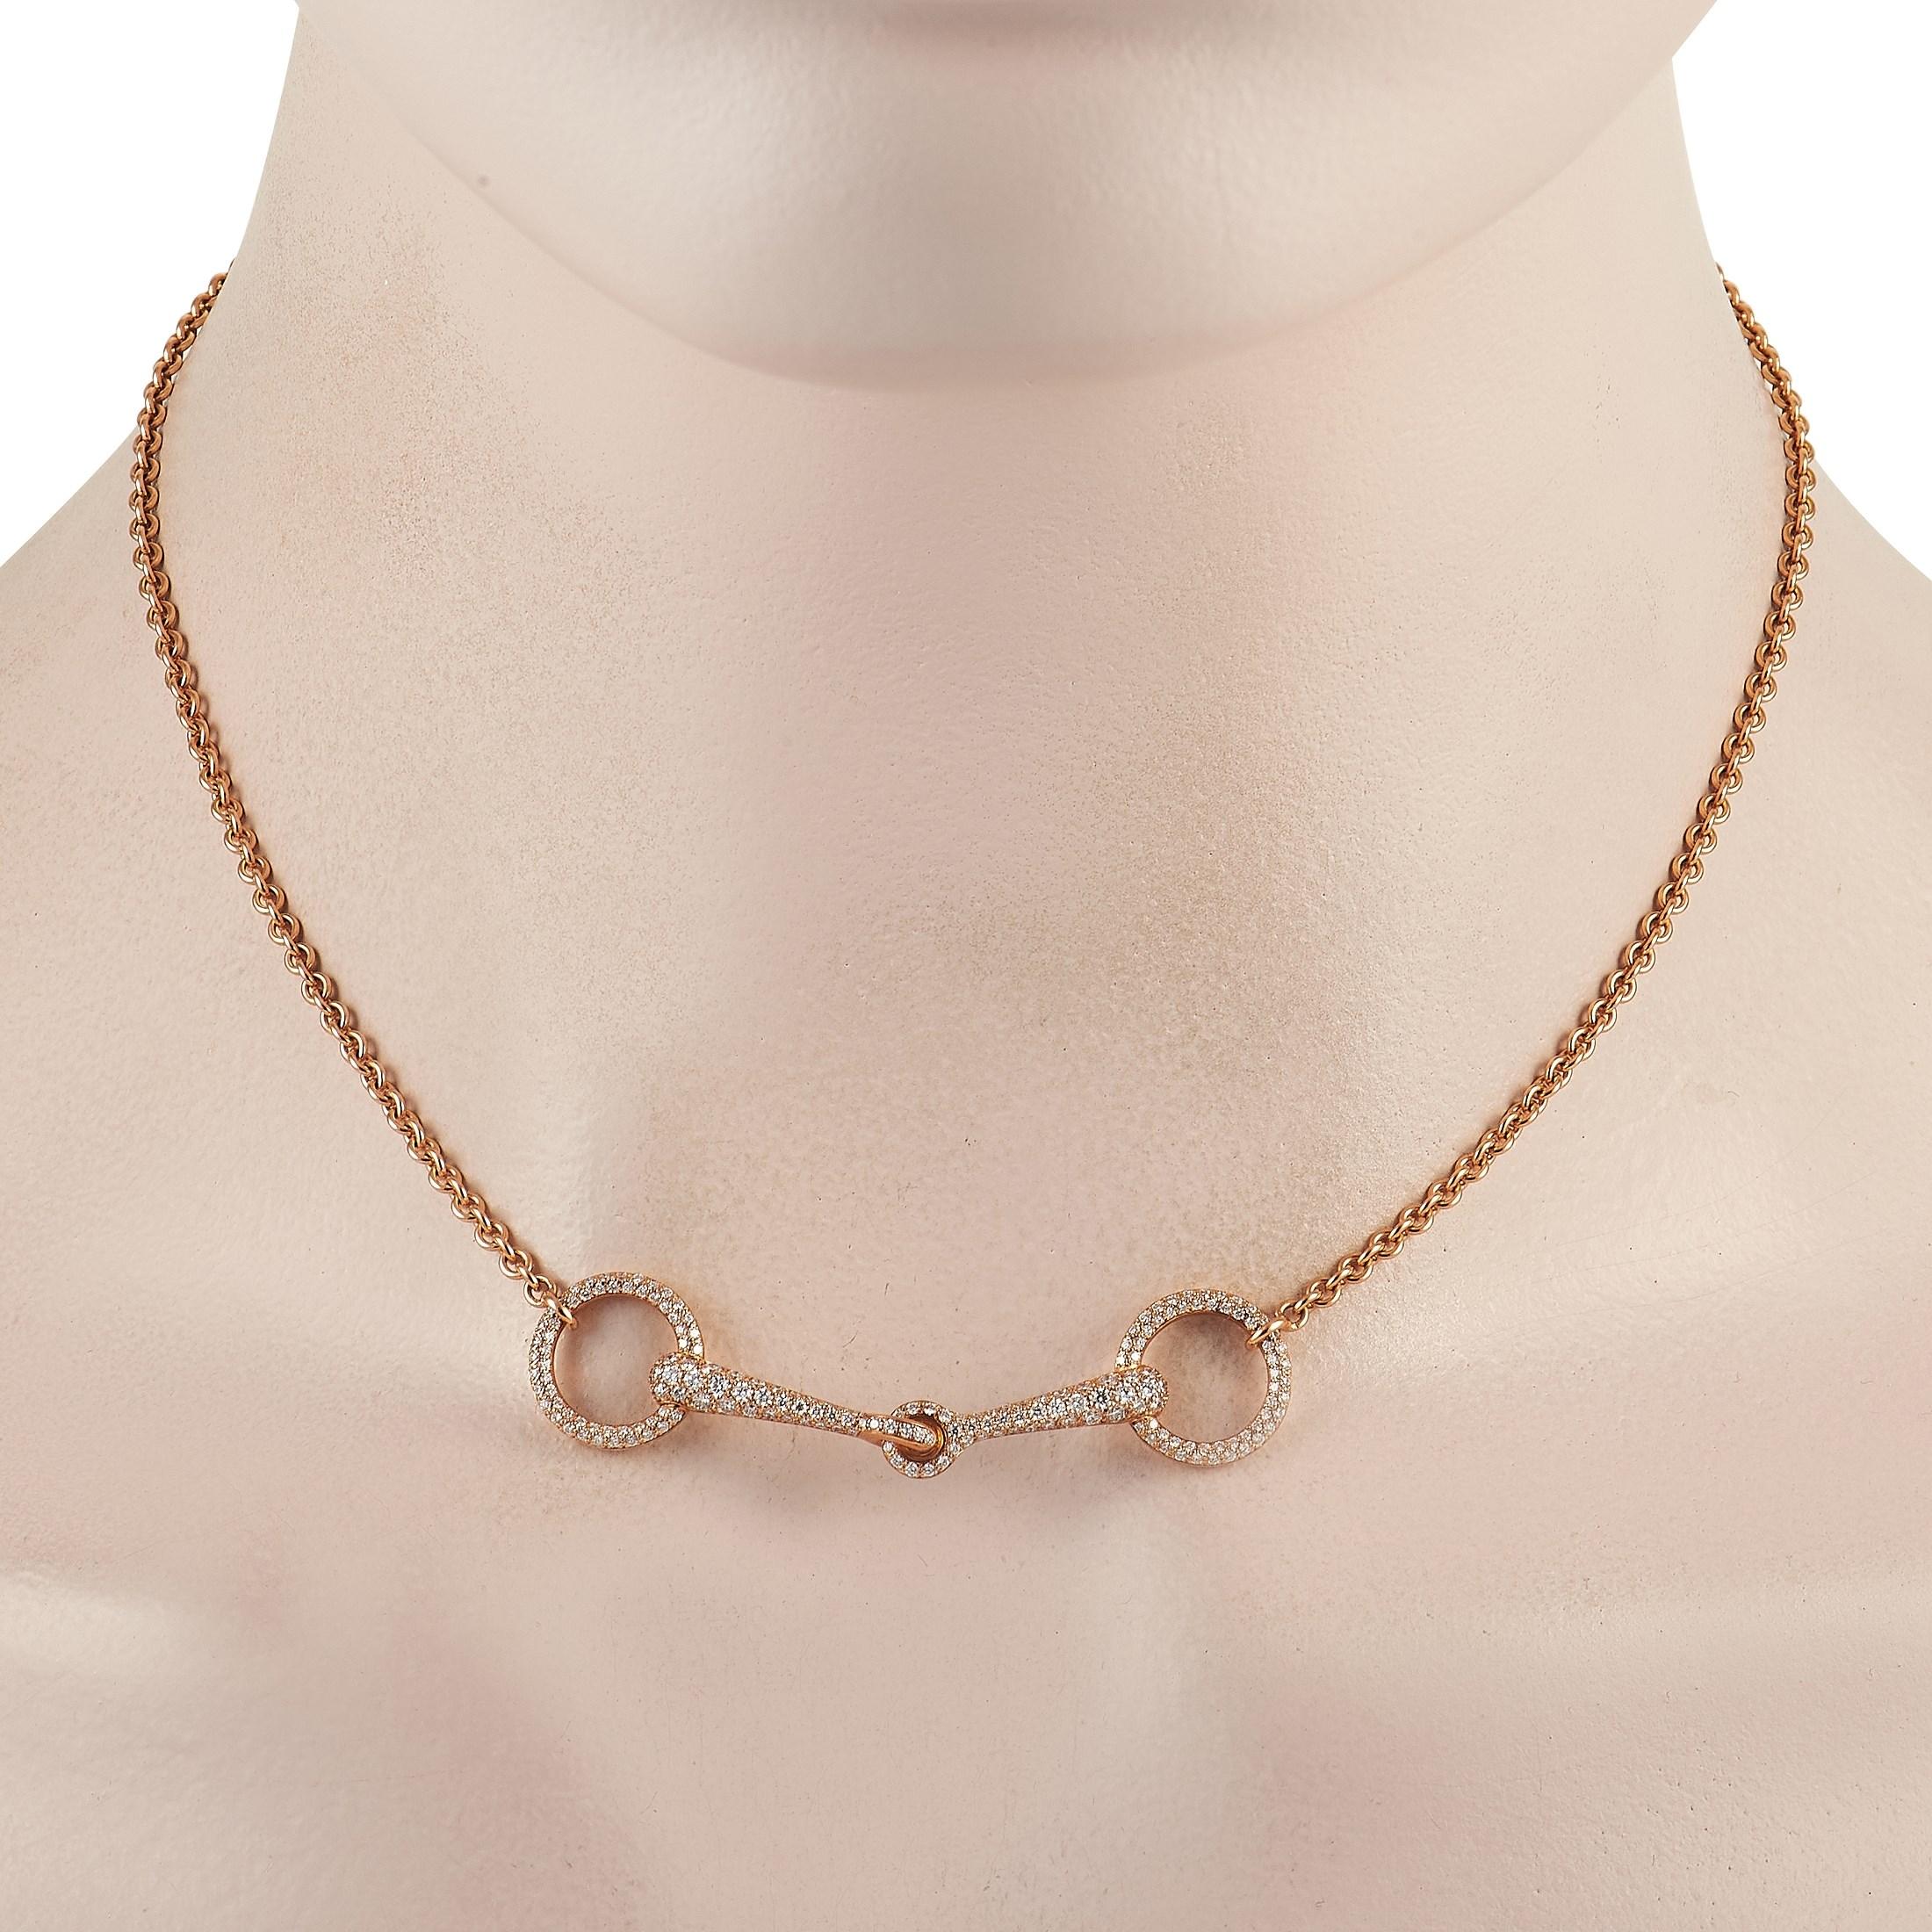 This Hermes Filet D’Or necklace pays tribute to the beauty of equestrian buckles. Crafted from 18K Rose Gold, the delicate pendant measures 2” long, 0.5” wide, and is covered in sparkling diamonds totaling 0.96 carats. It sits at the center of a